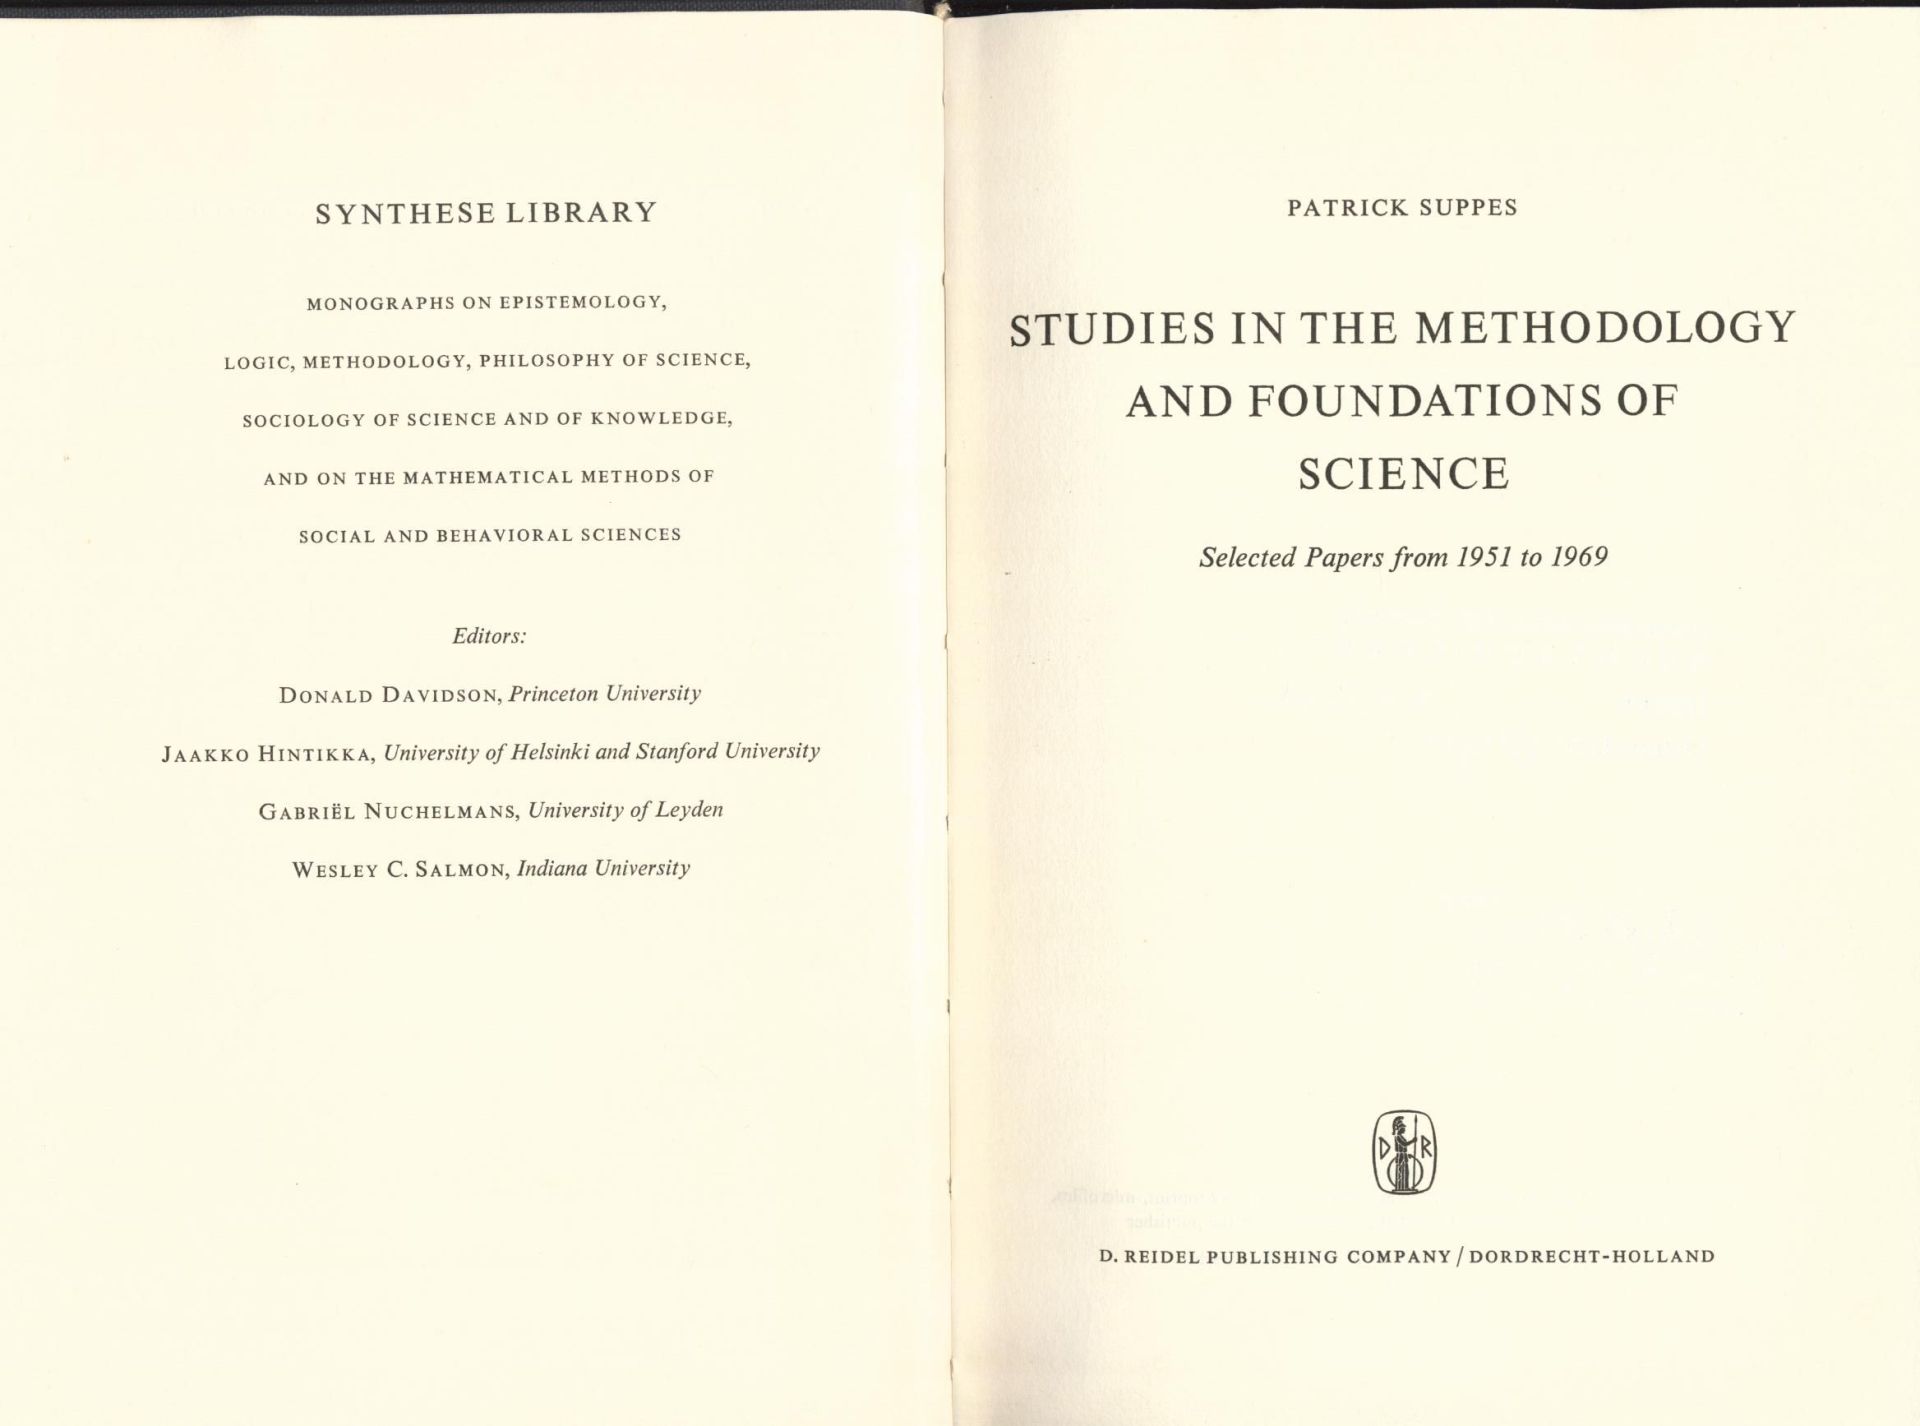 Studies in the Methodology and Foundations of Science Selected Papers from 1951 to 1969 - Suppes, Patrick